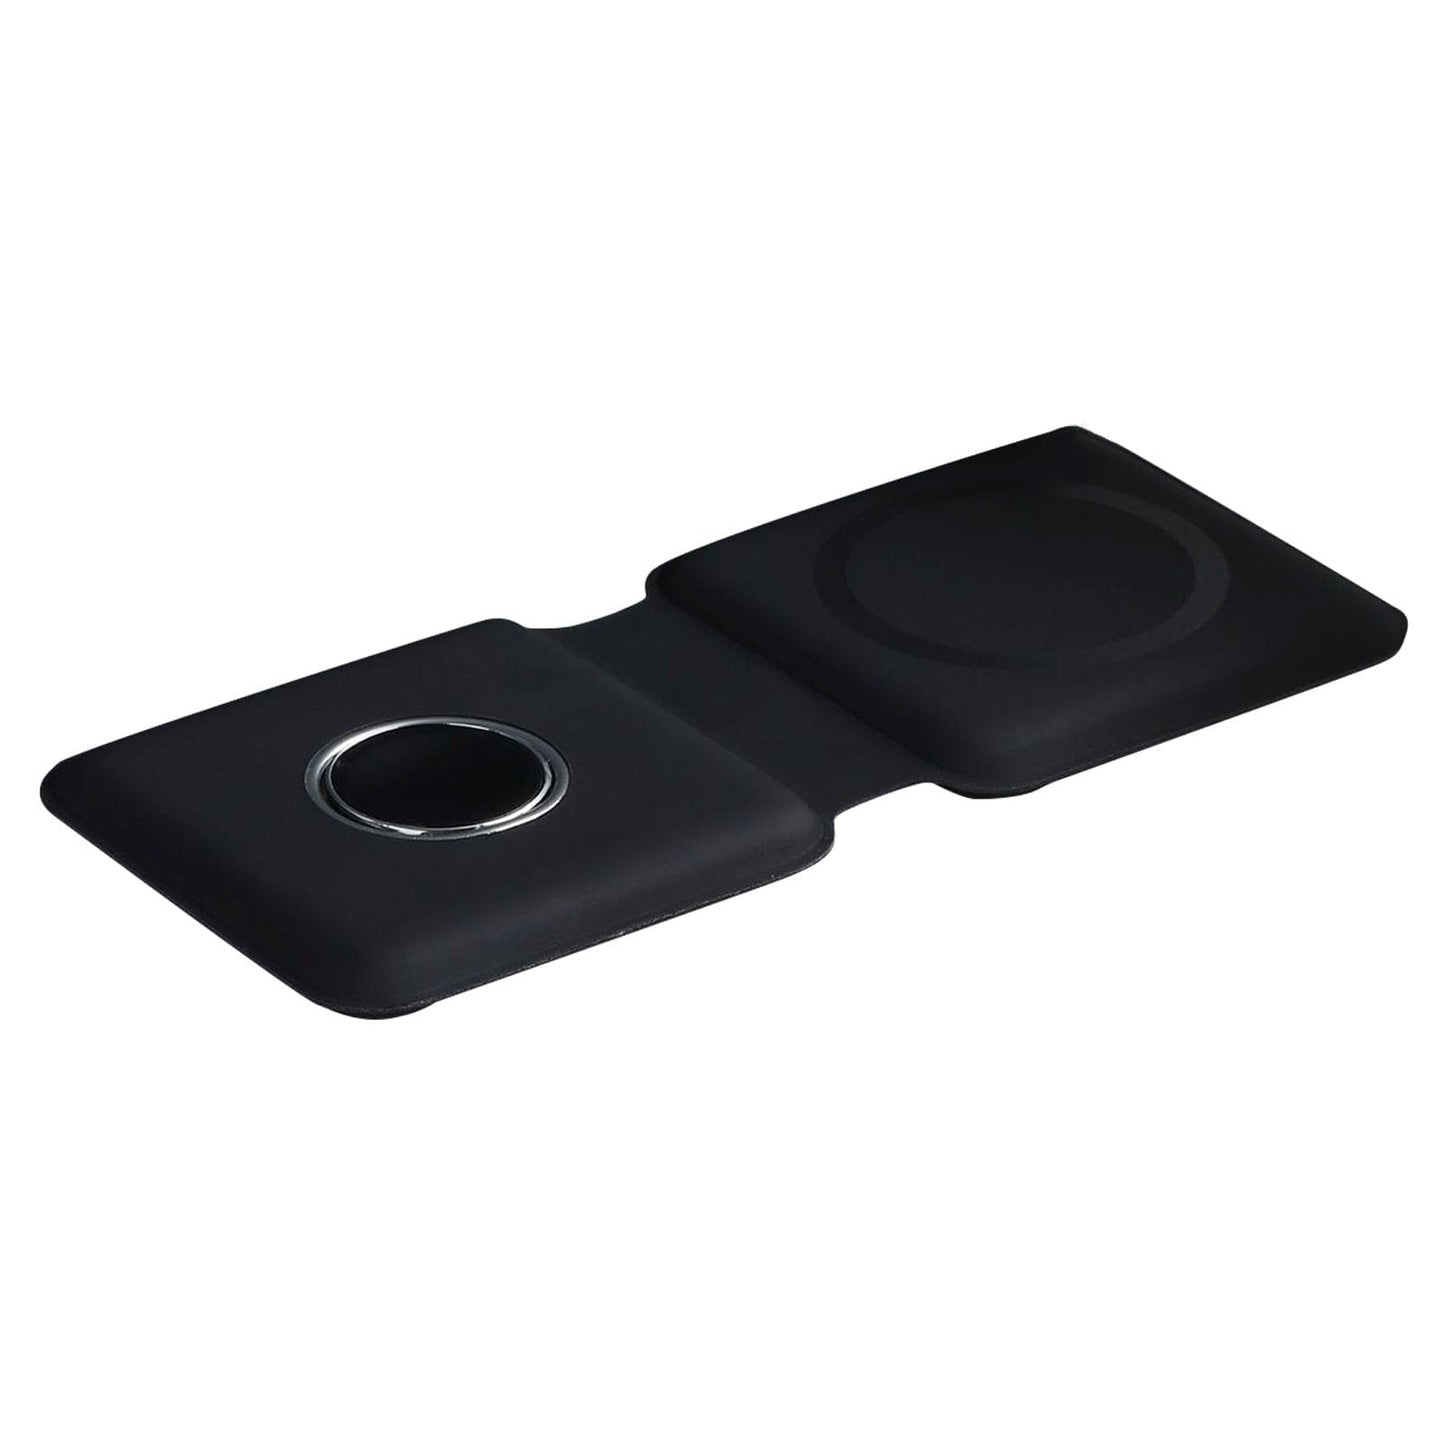 Magsafe15W Fast Charging Wireless Charging Three-In-One Folding Magnetic Wireless Charger For Apple Headset Watch - CLASSY CLOSET BOUTIQUEMagsafe15W Fast Charging Wireless Charging Three-In-One Folding Magnetic Wireless Charger For Apple Headset Watcheperlo8F43807B11E14C03A6E0586959DDC2C73 in 1 Black No Night Light